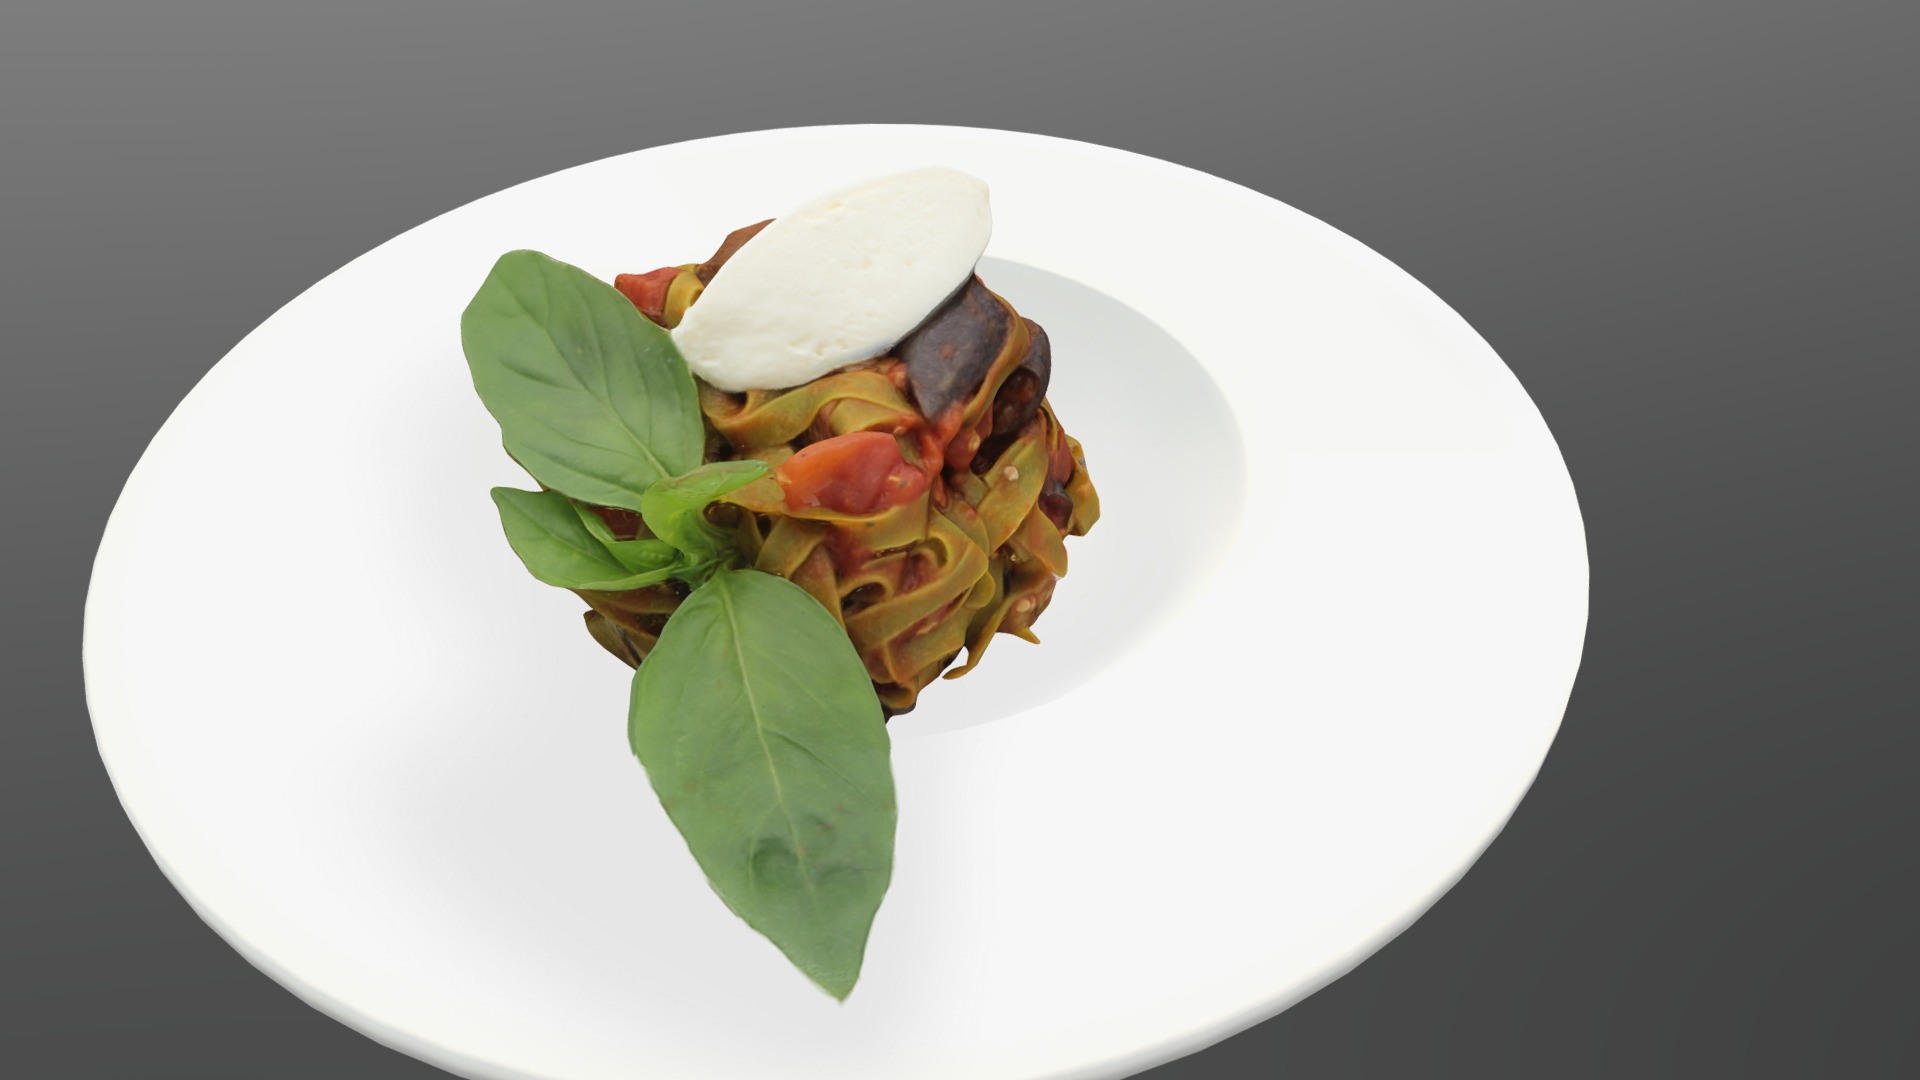 3D model 8Olimp - This is a 3D model of the 8Olimp. The 3D model is about a plate with food on it.